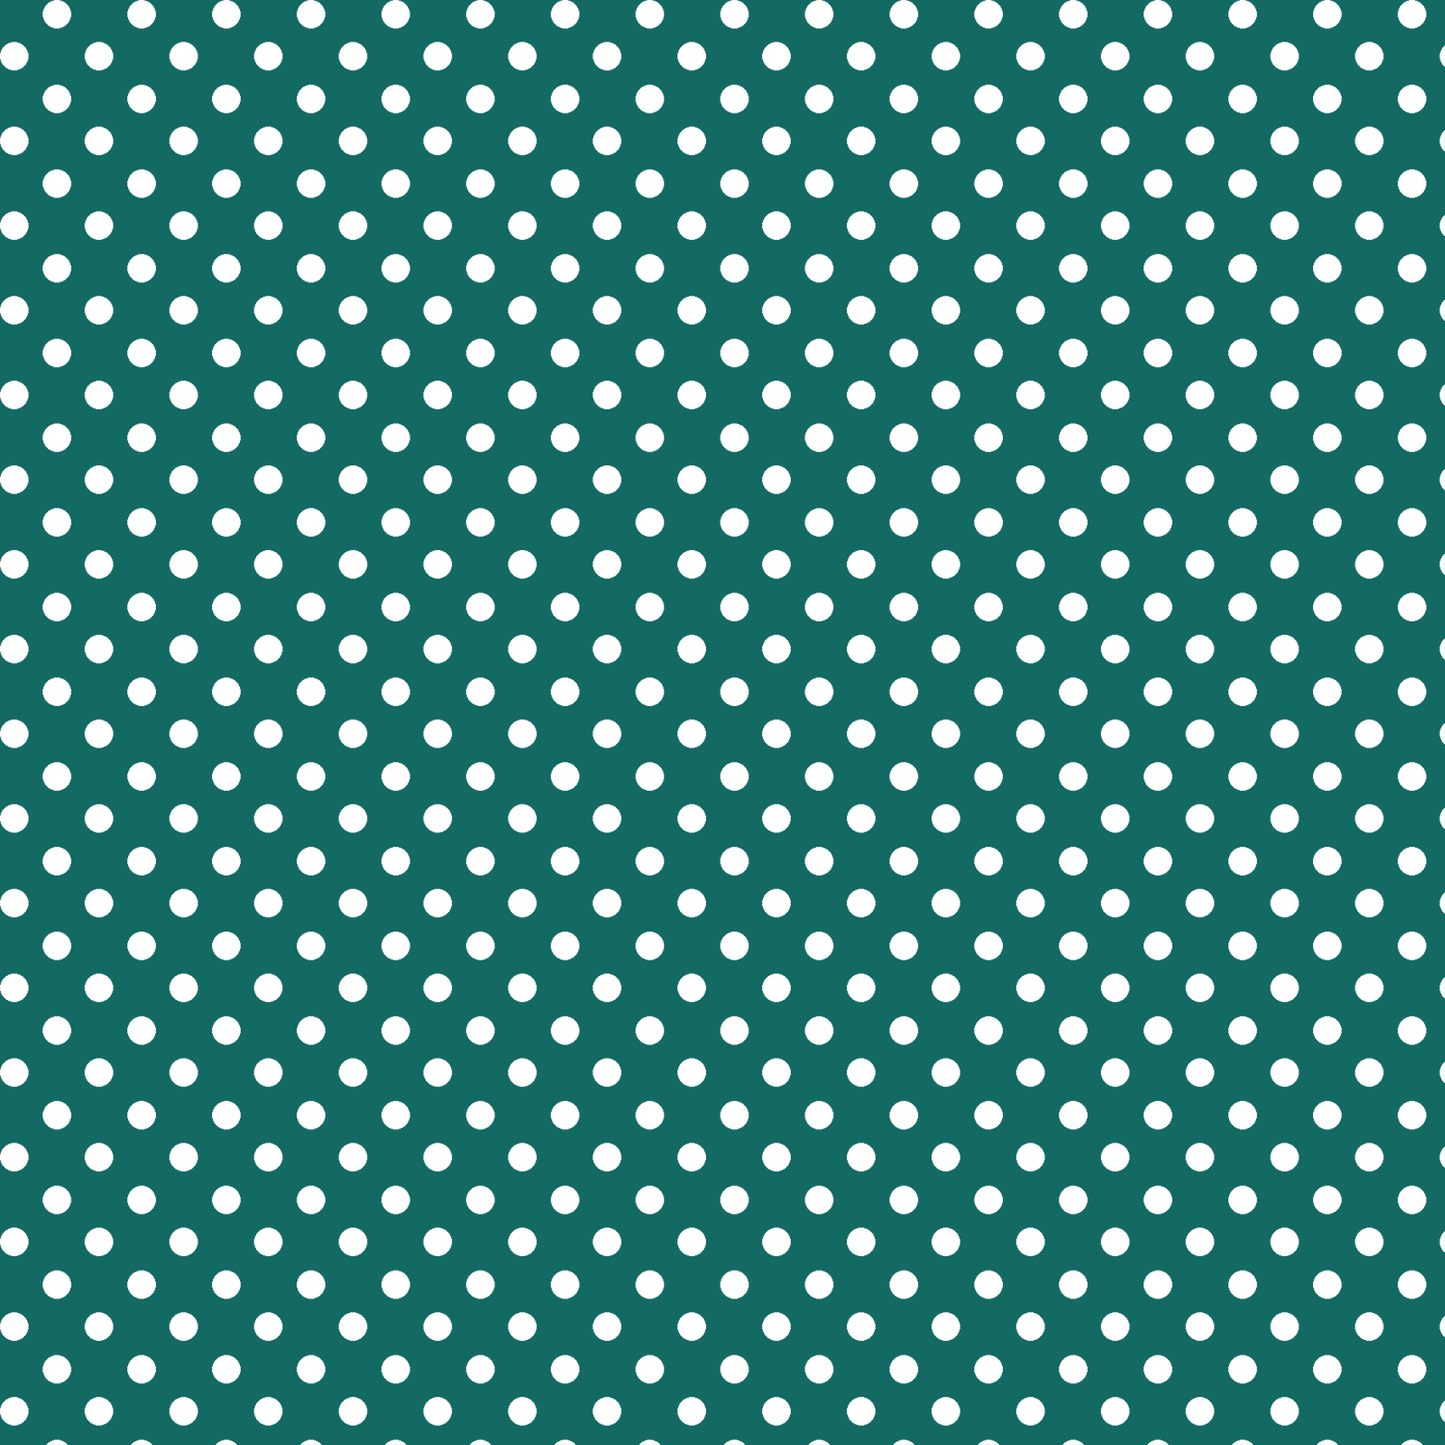 Tiny Dot in Emerald